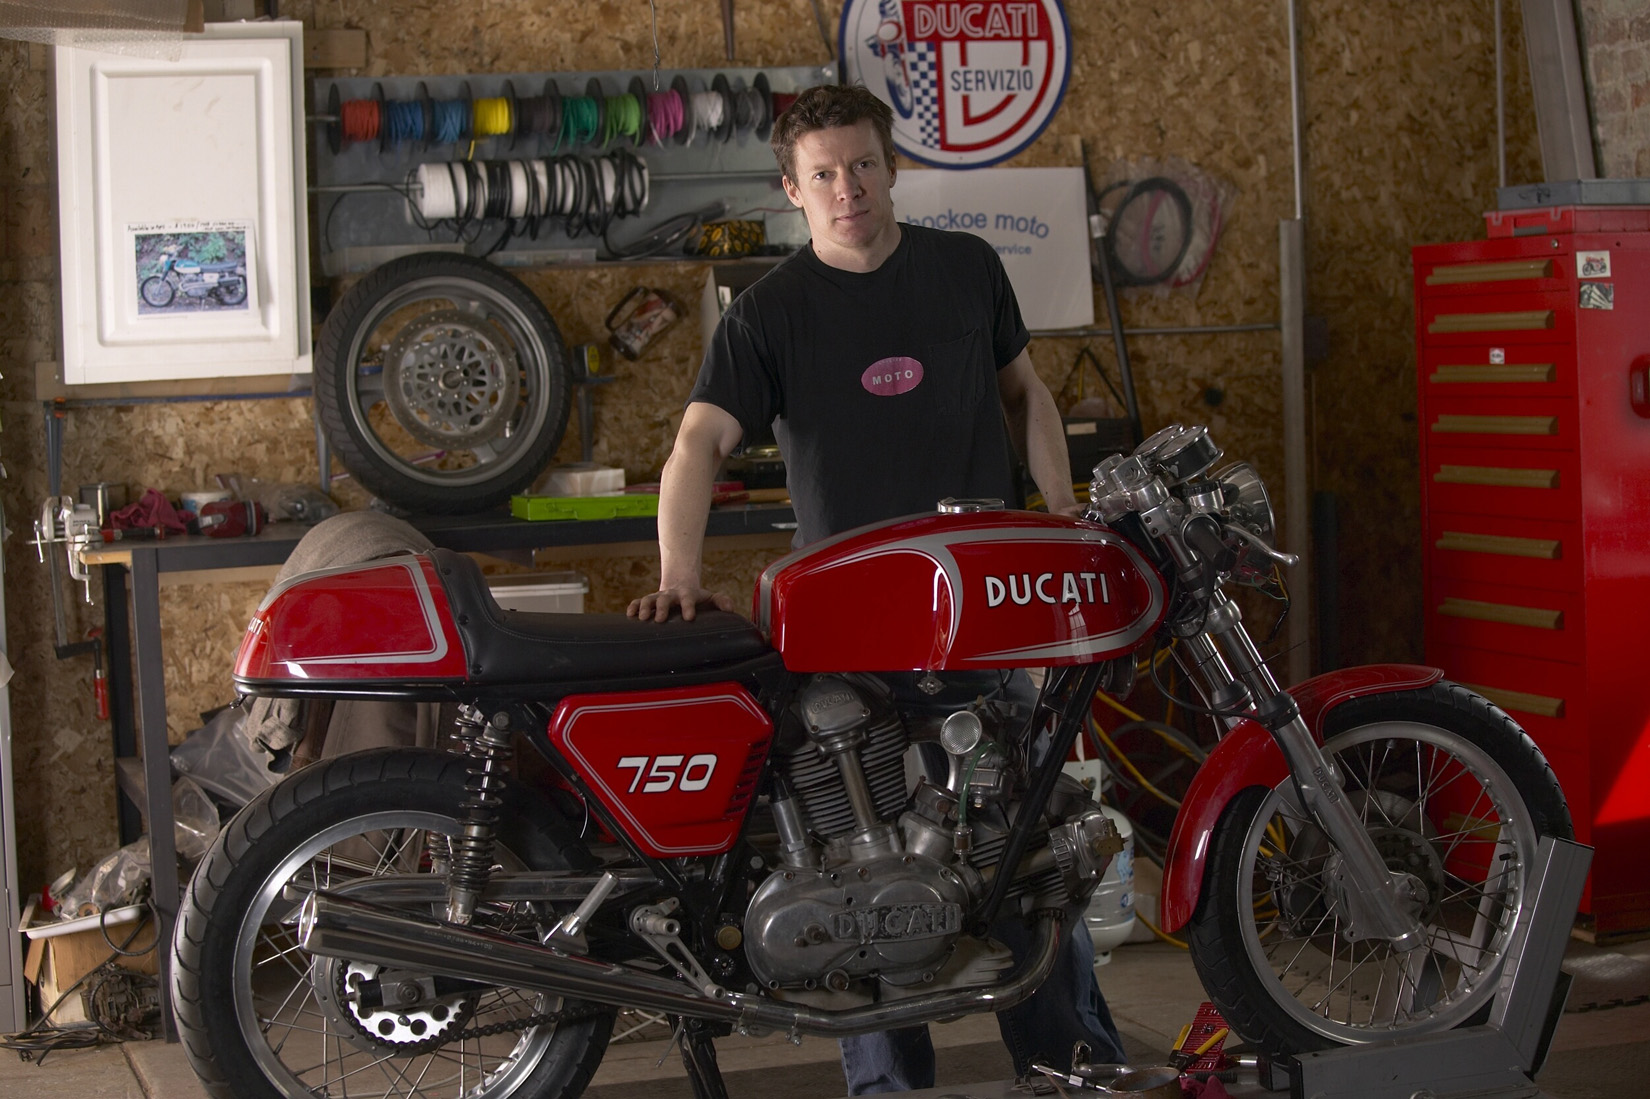 Matthew Crawford stands with a 750 Ducati motorcycle